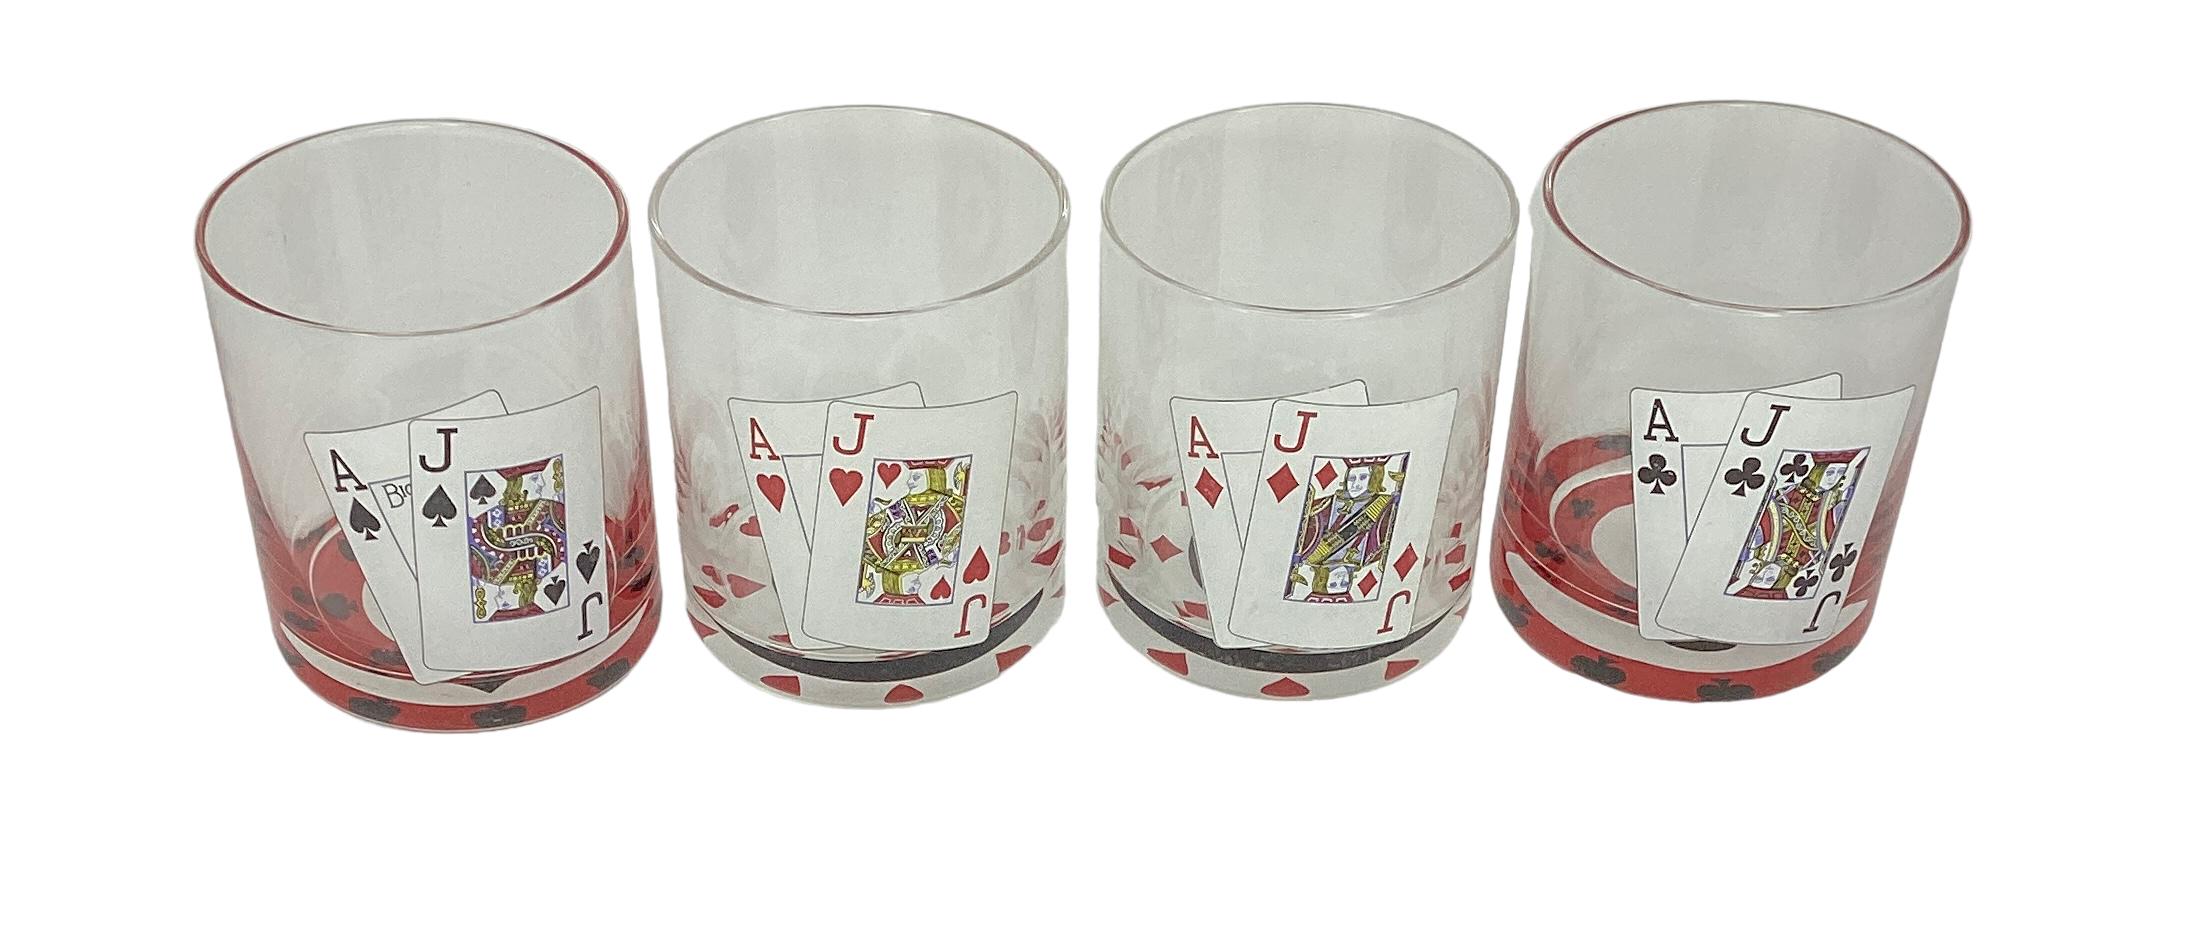 Set of 4 Vintage Blackjack Double Rocks Glasses. Each glass with a blackjack hand and the bottom of each glass with the suites of diamond, heart, club and spade.